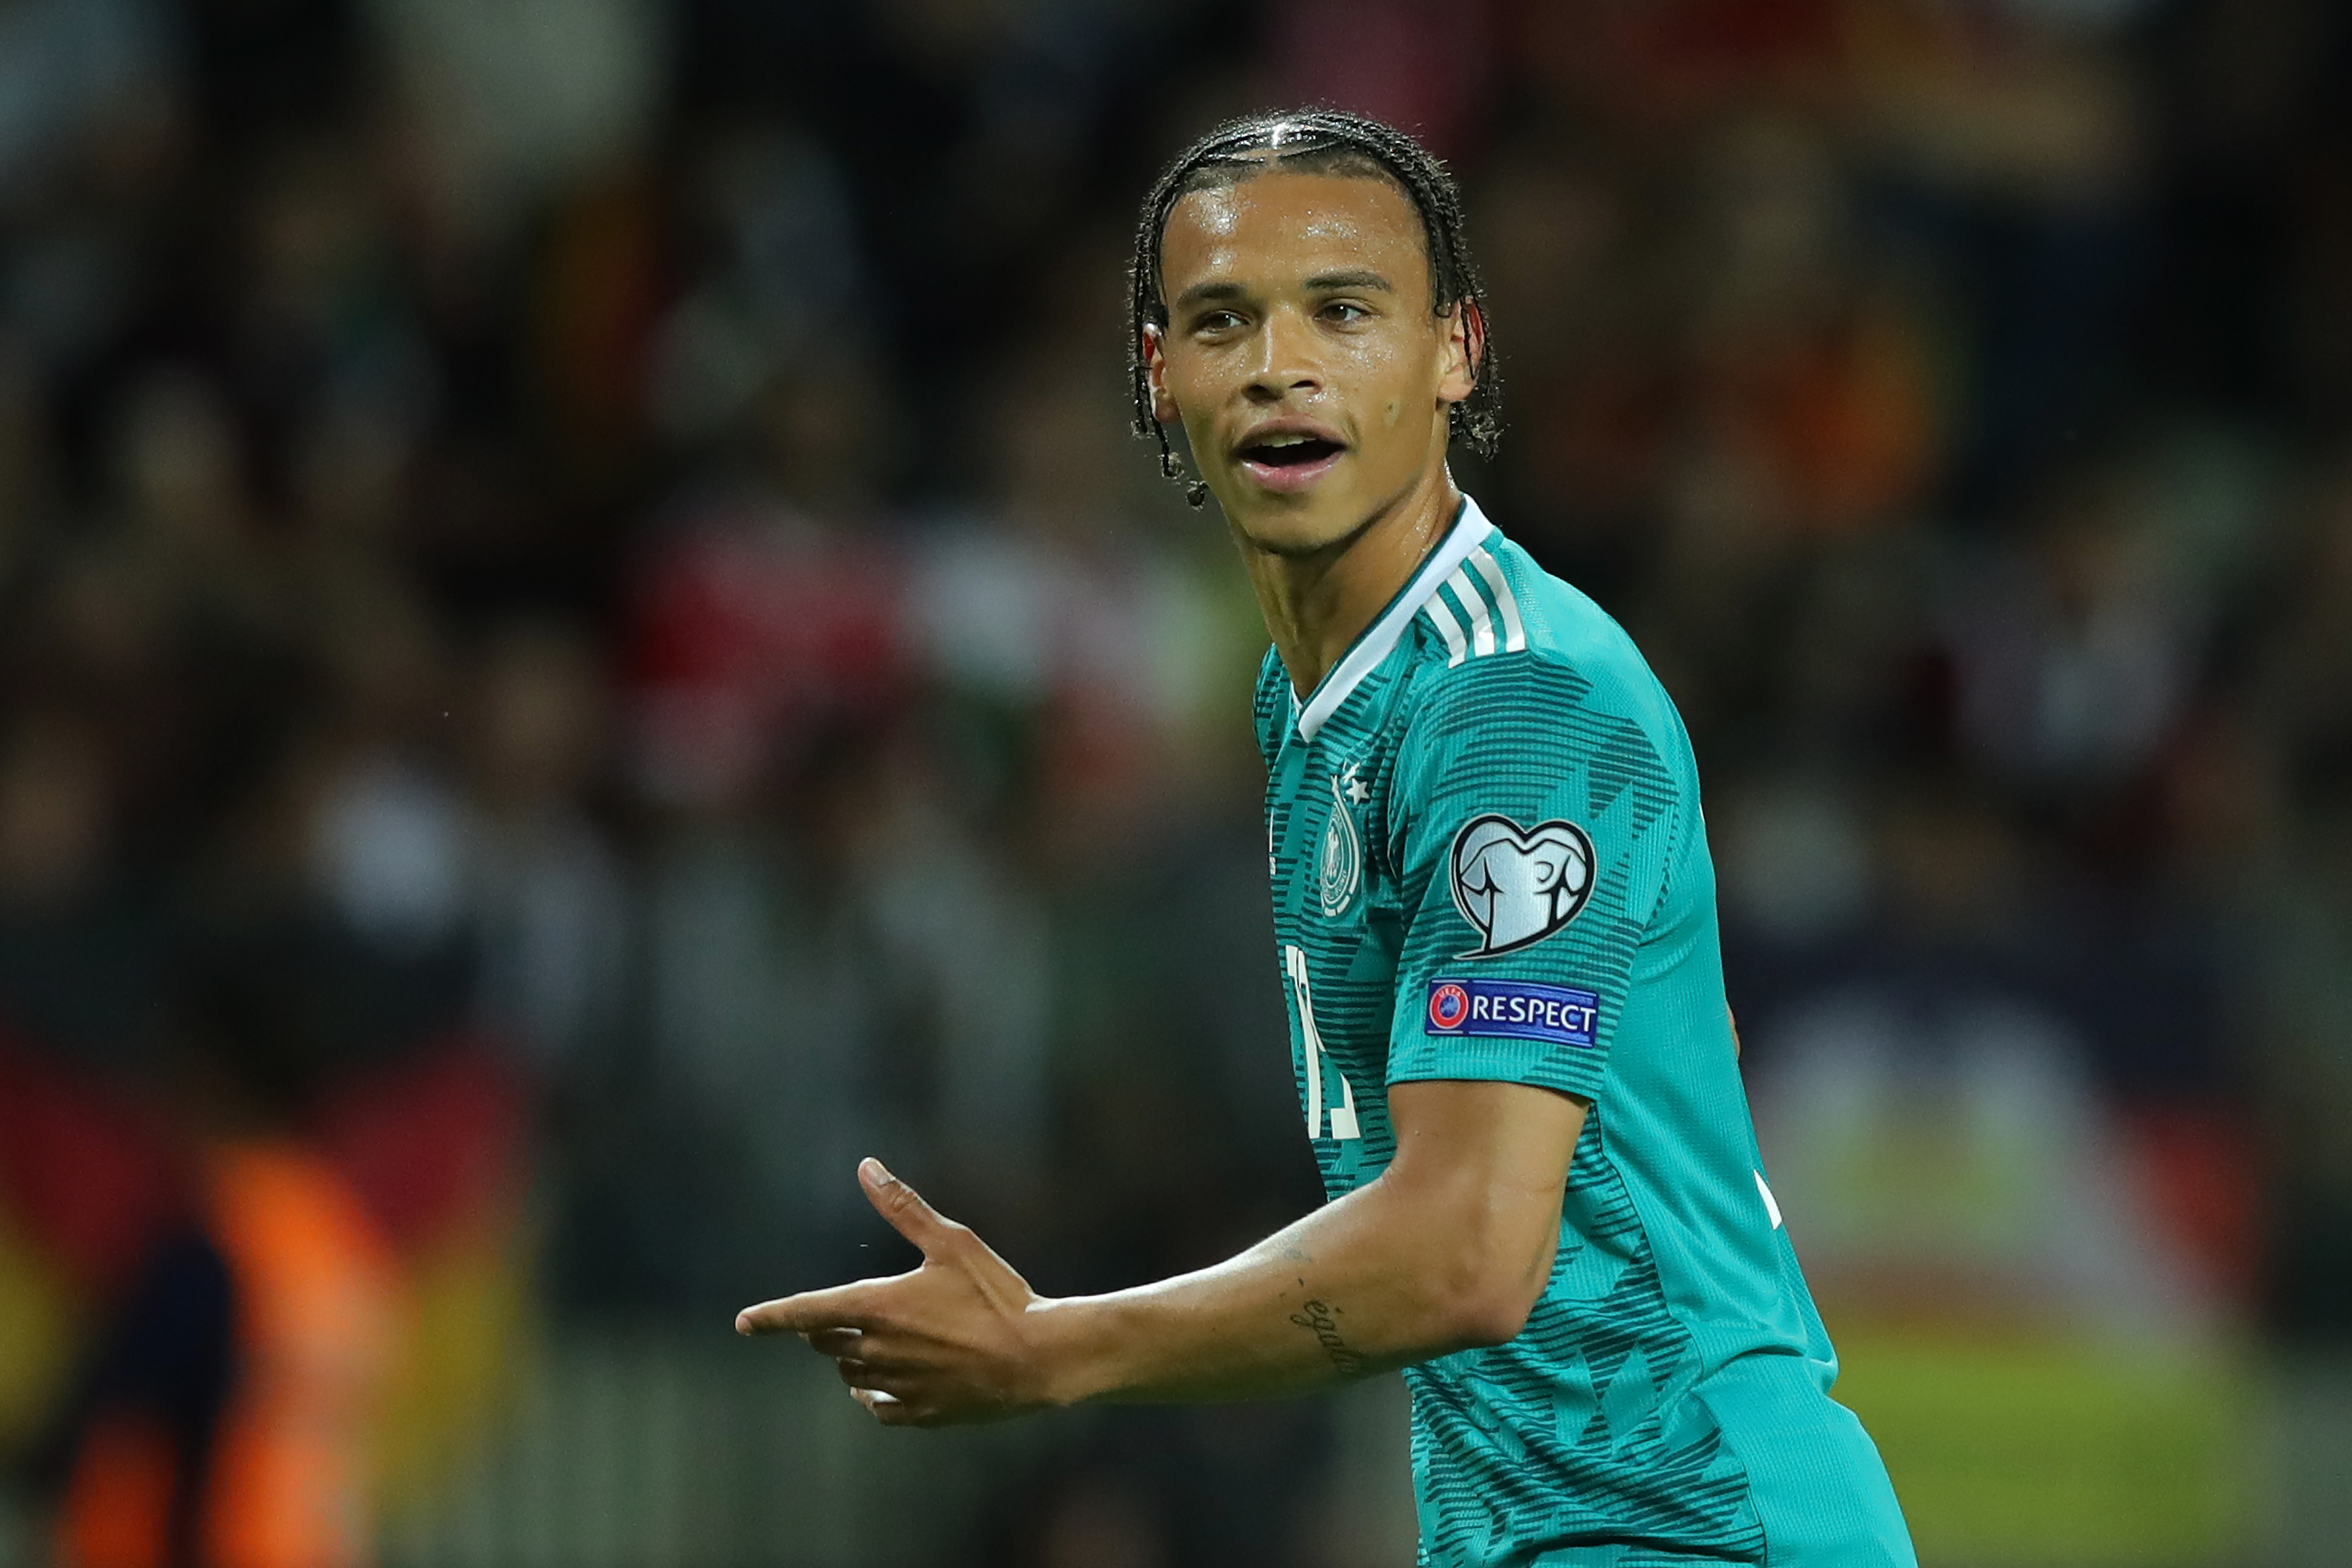 Leroy Sane returns to the national team for the first time since June 2019 (Photo by Alexander Hassenstein/Bongarts/Getty Images)